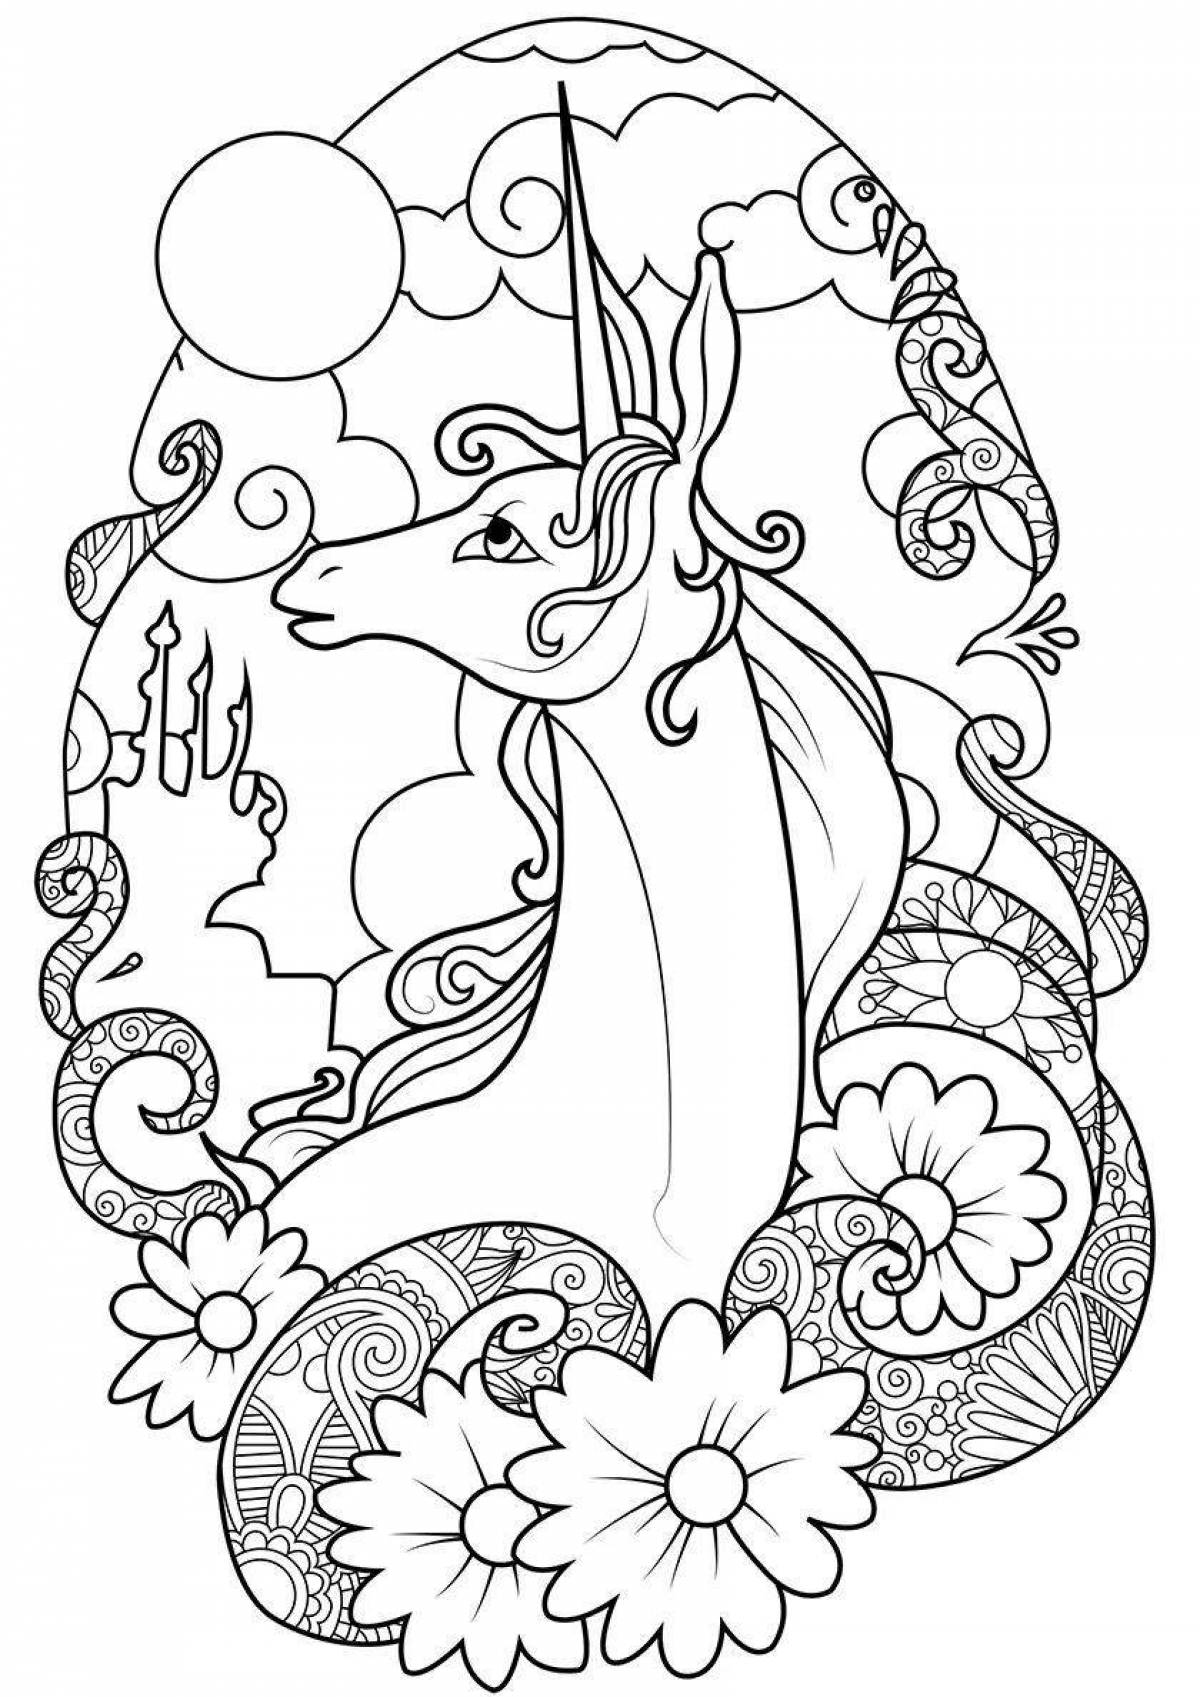 Charming fairy beast coloring book